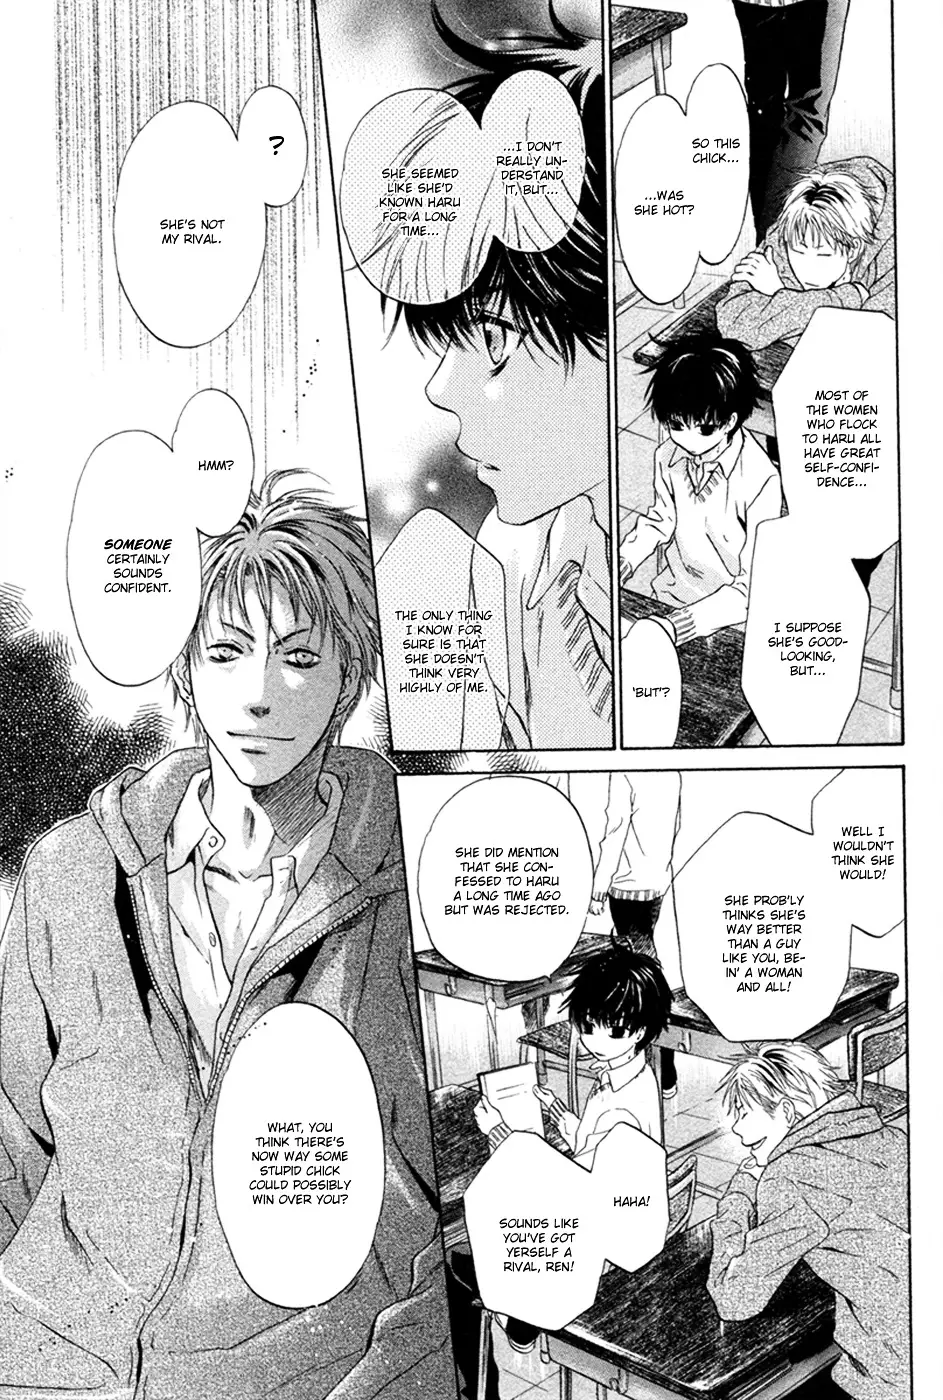 Super Lovers - 7 page 16-4abac621